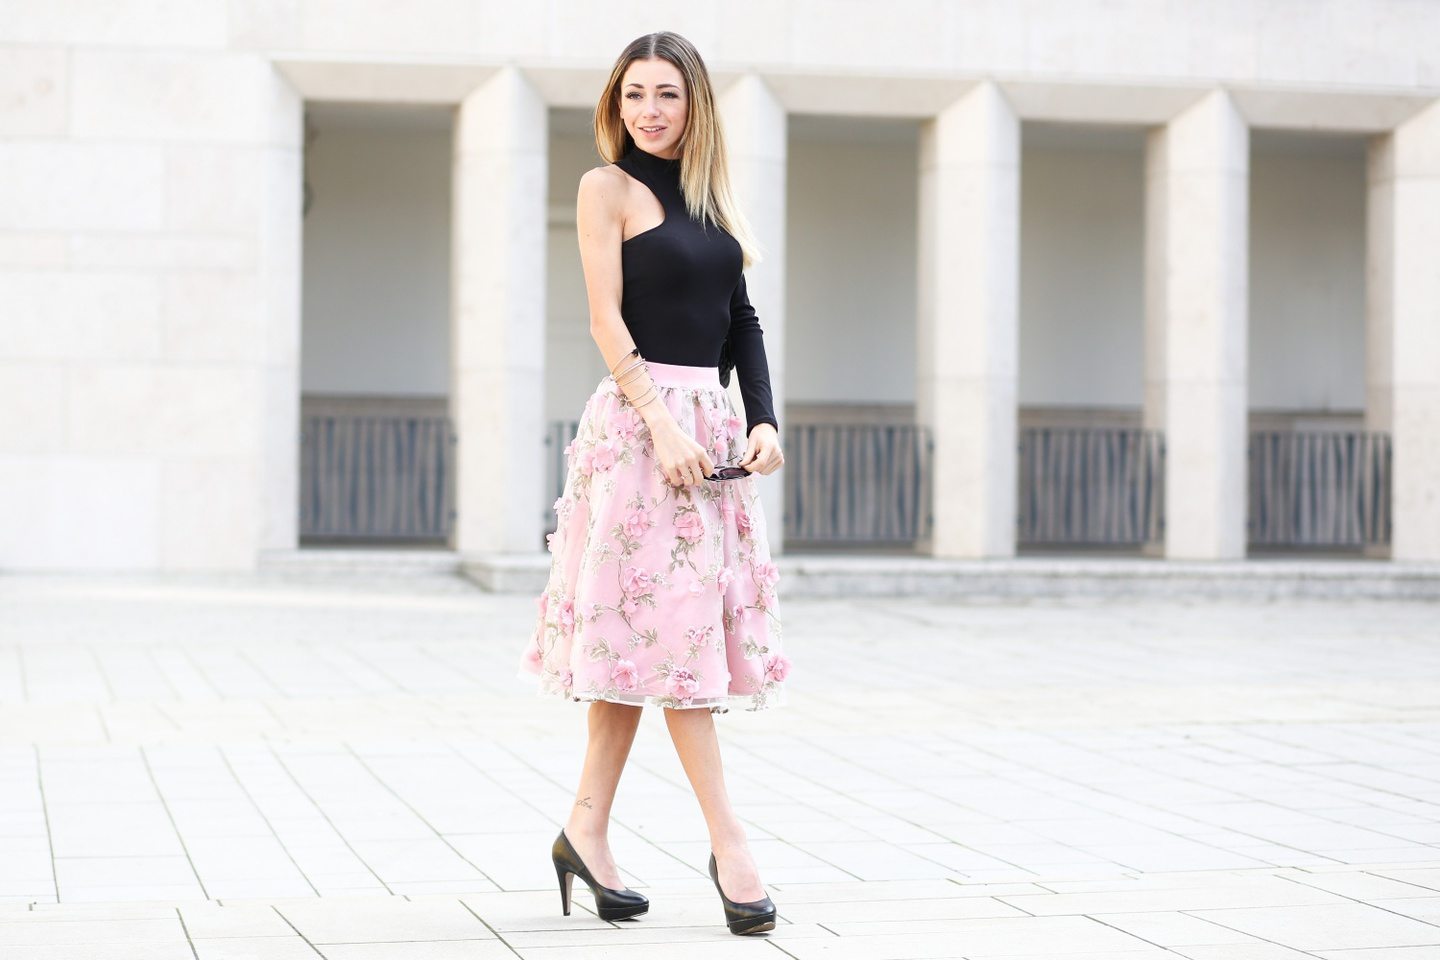 Put Together an All-Pink Outfit and We’ll Give You a New Hairstyle Pink floral skirt